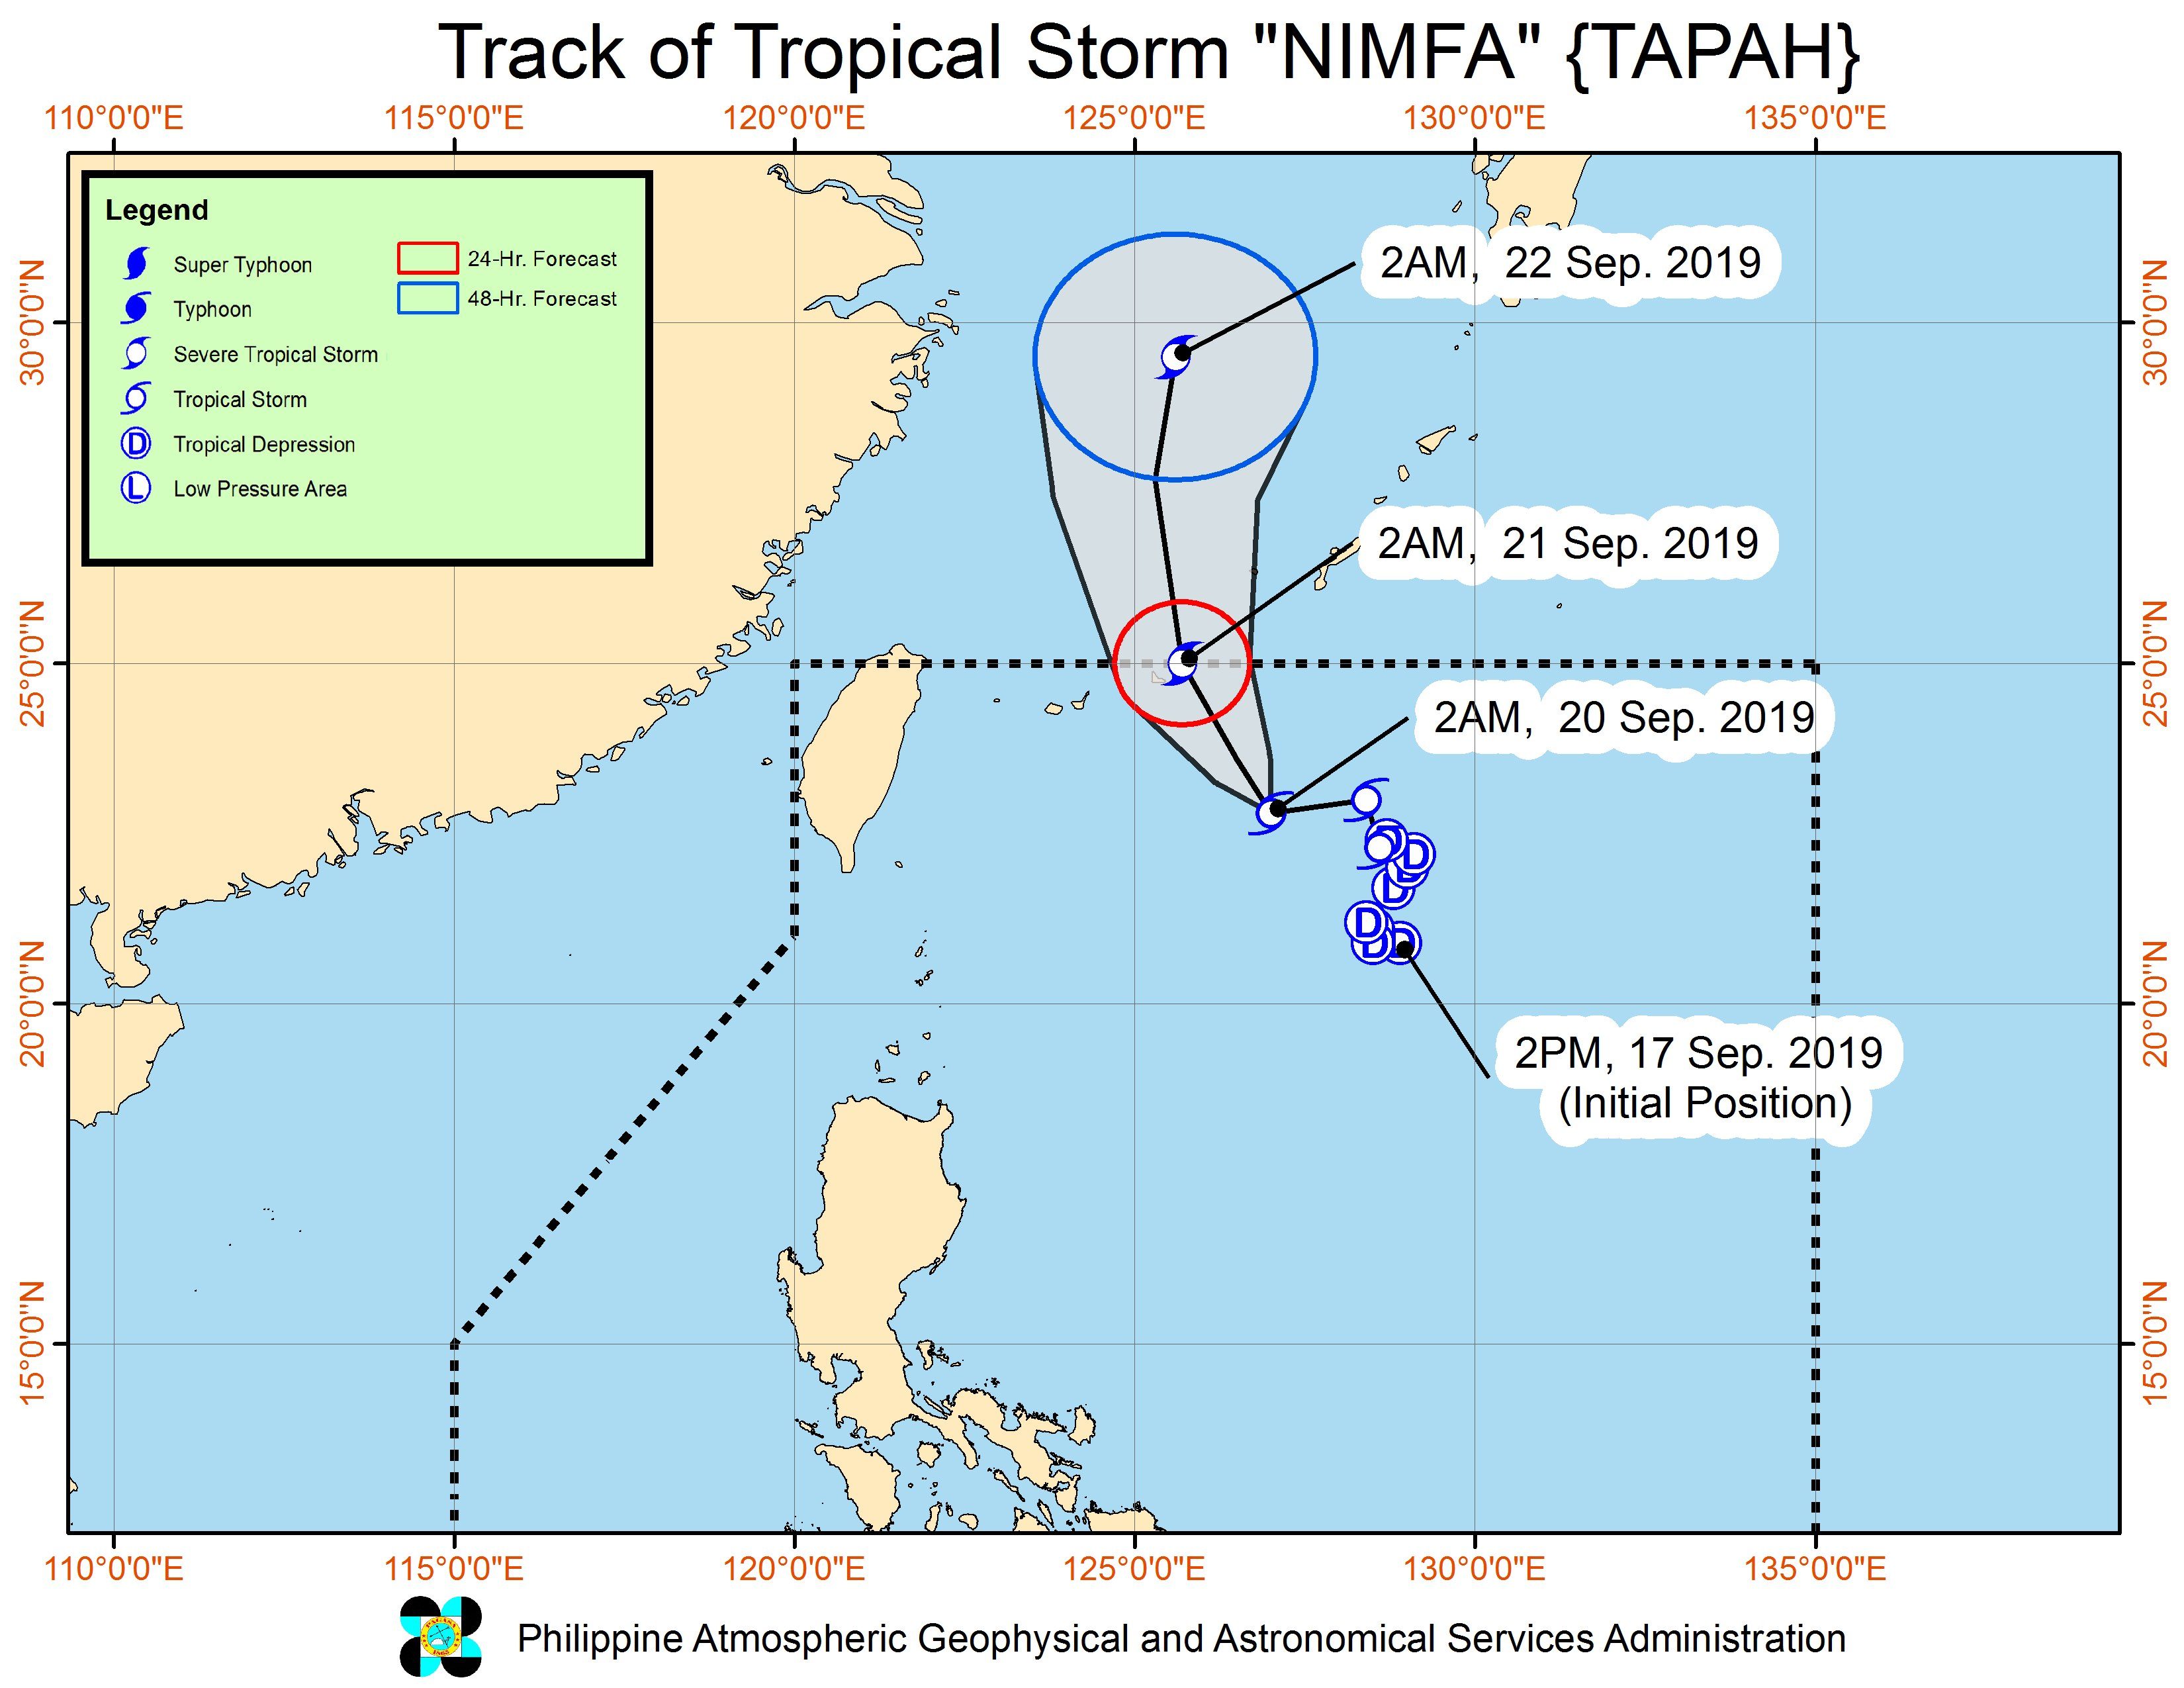 Forecast track of Tropical Storm Nimfa (Tapah) as of September 20, 2019, 5 am. Image from PAGASA 